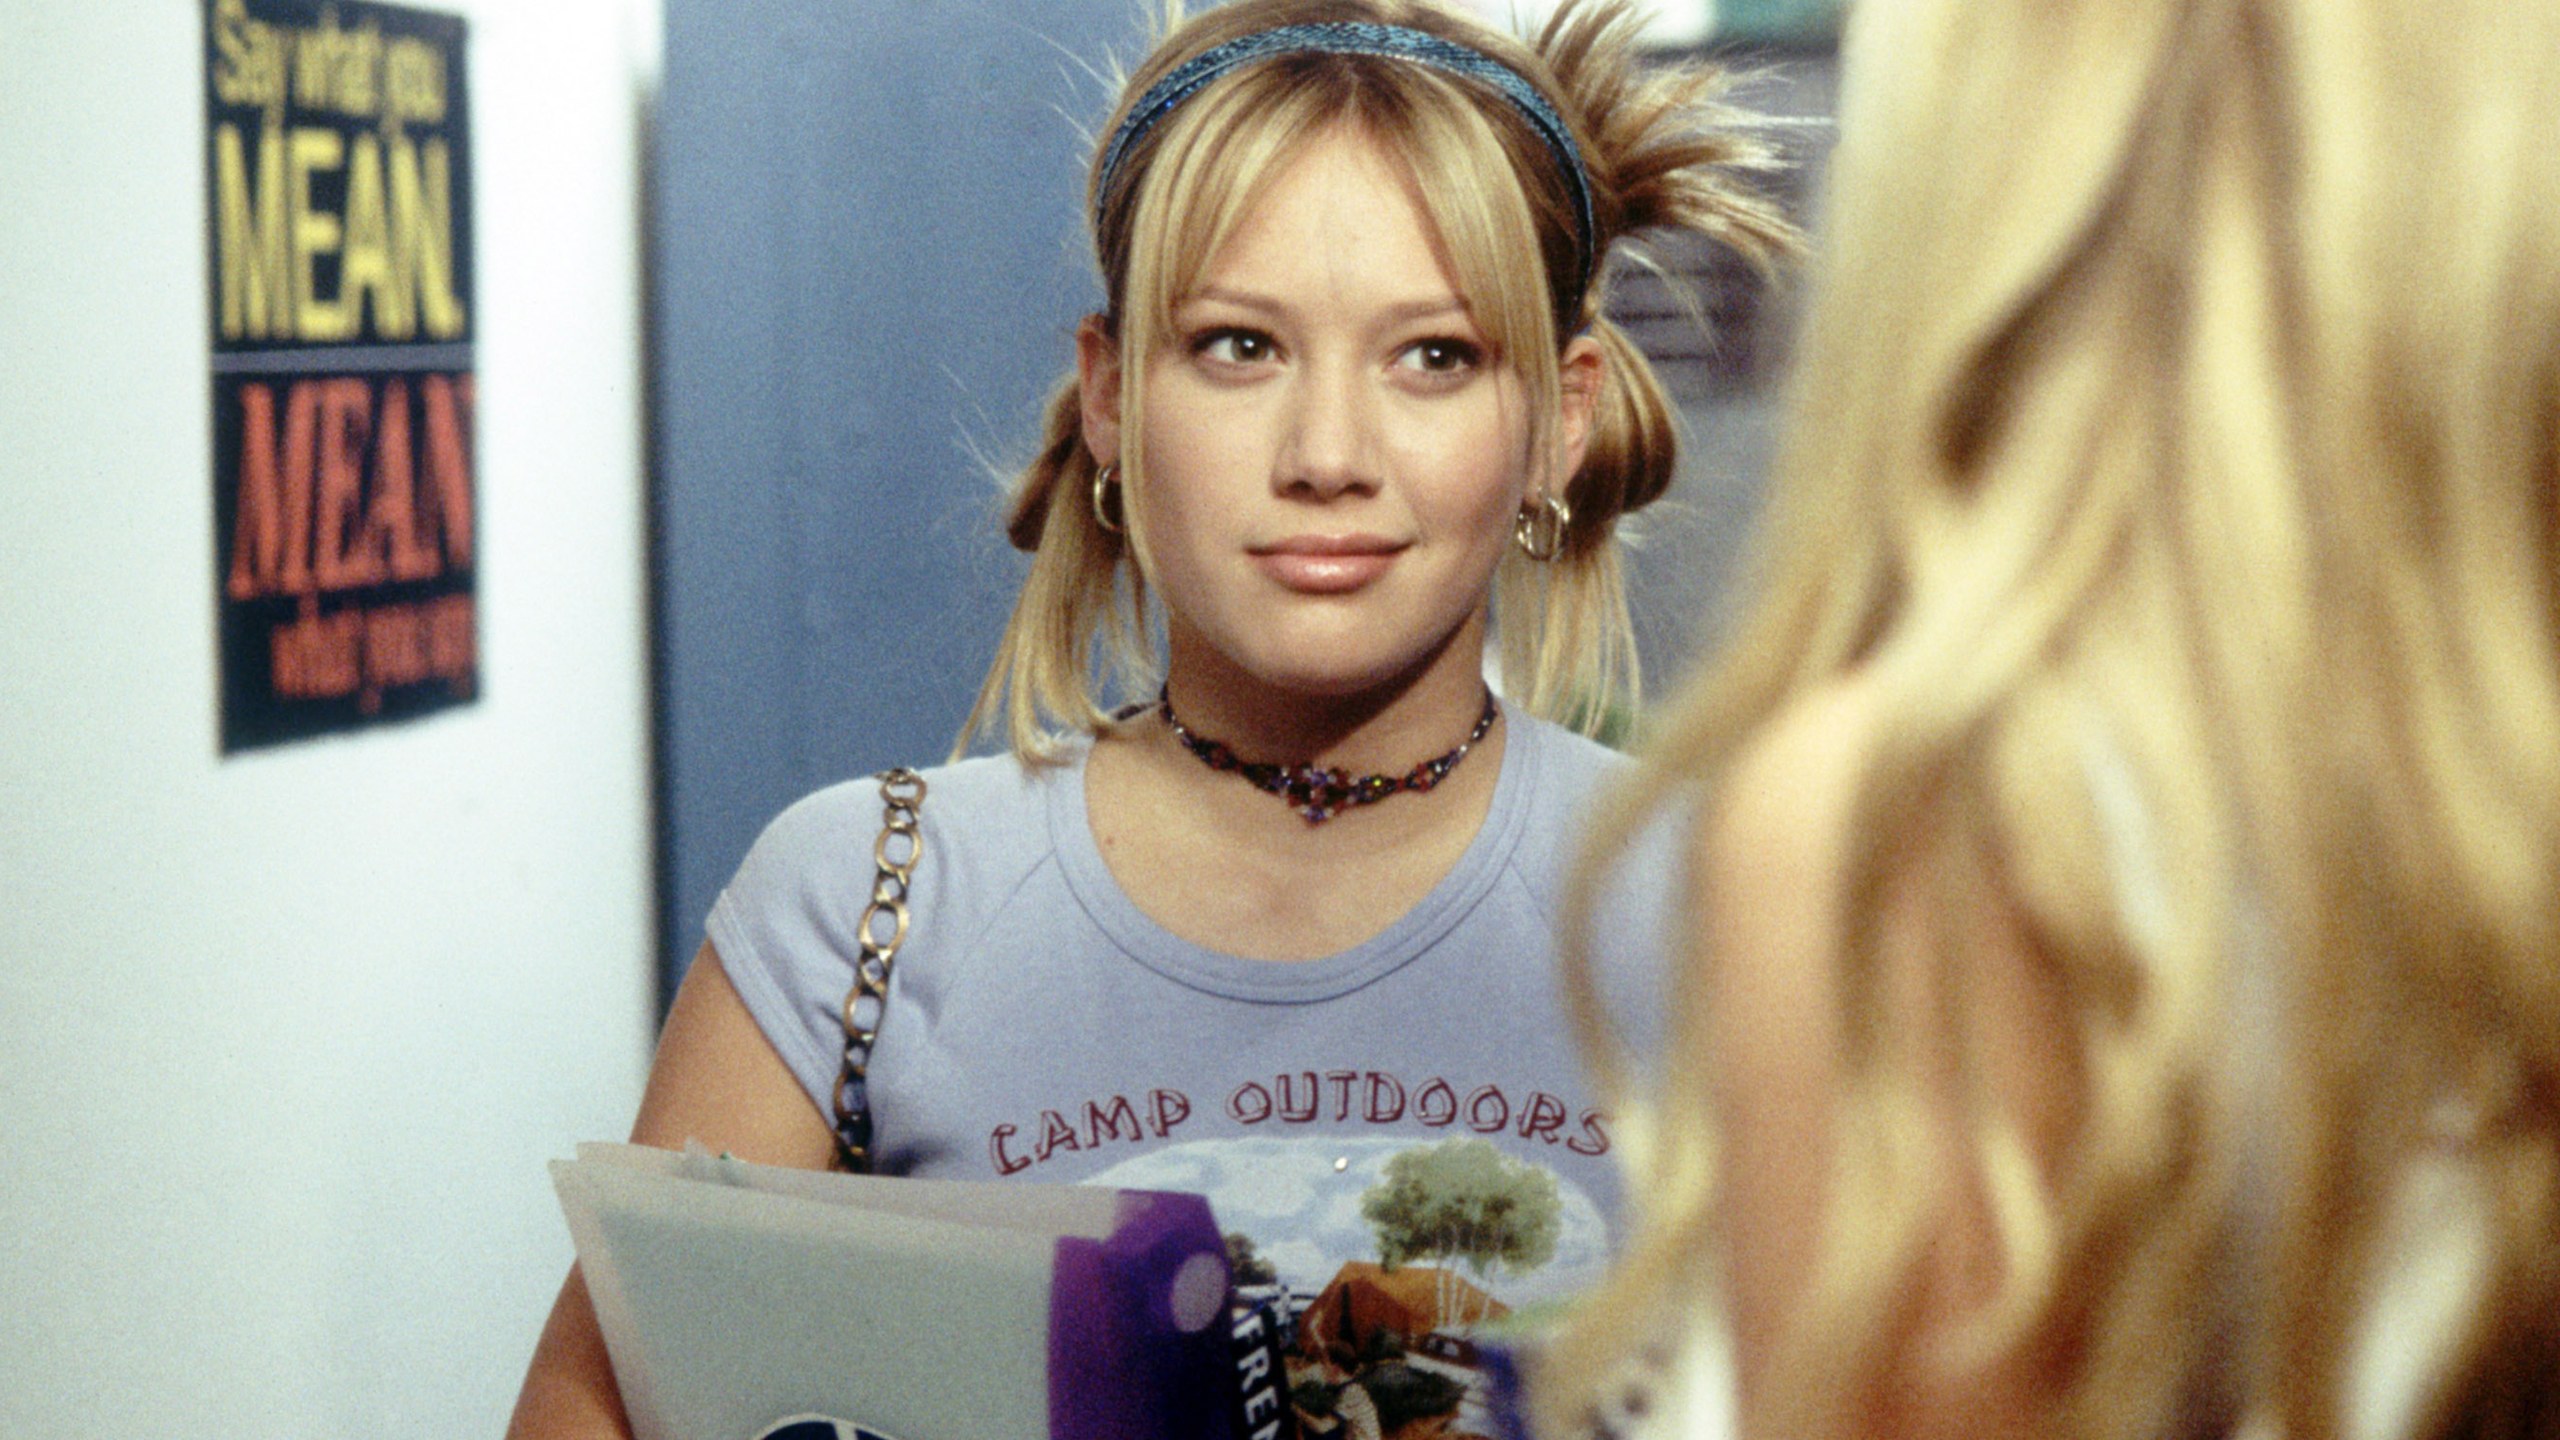 Production for Disney Plus 'Lizzie McGuire' Reboot Comes to an End